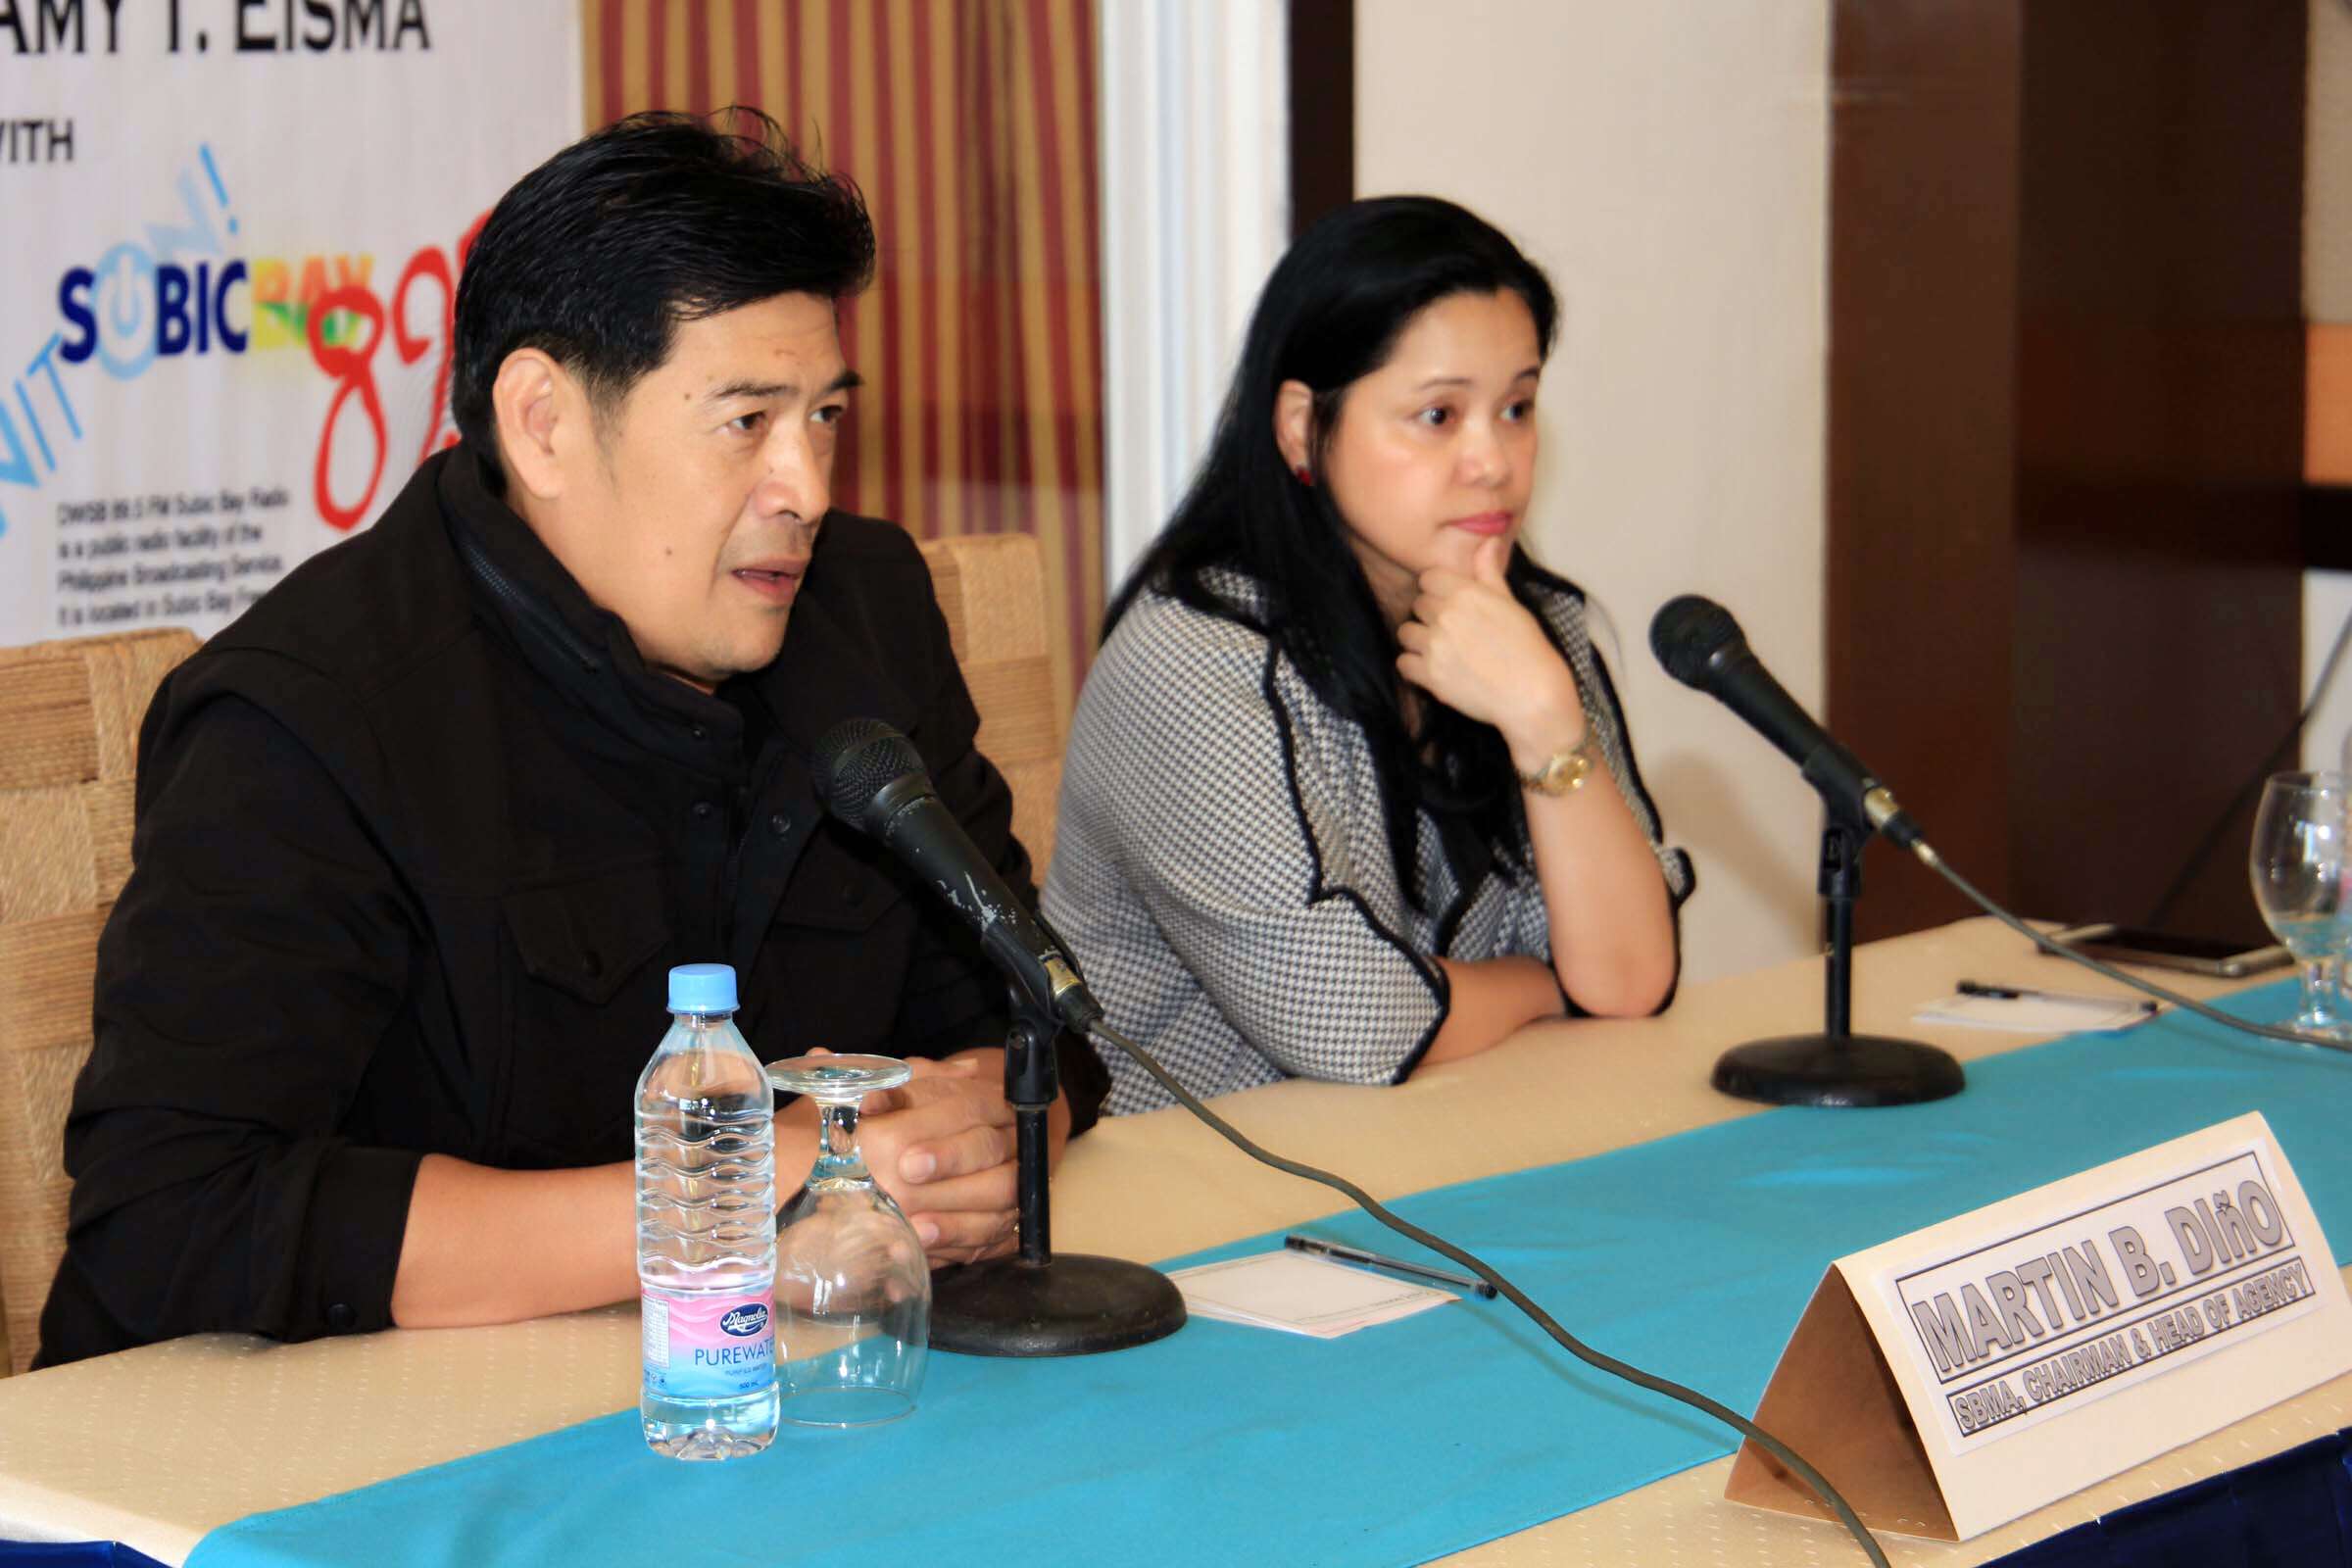 (From left): Martin Diño, chairman; and Wilma Eisma, administrator and CEO